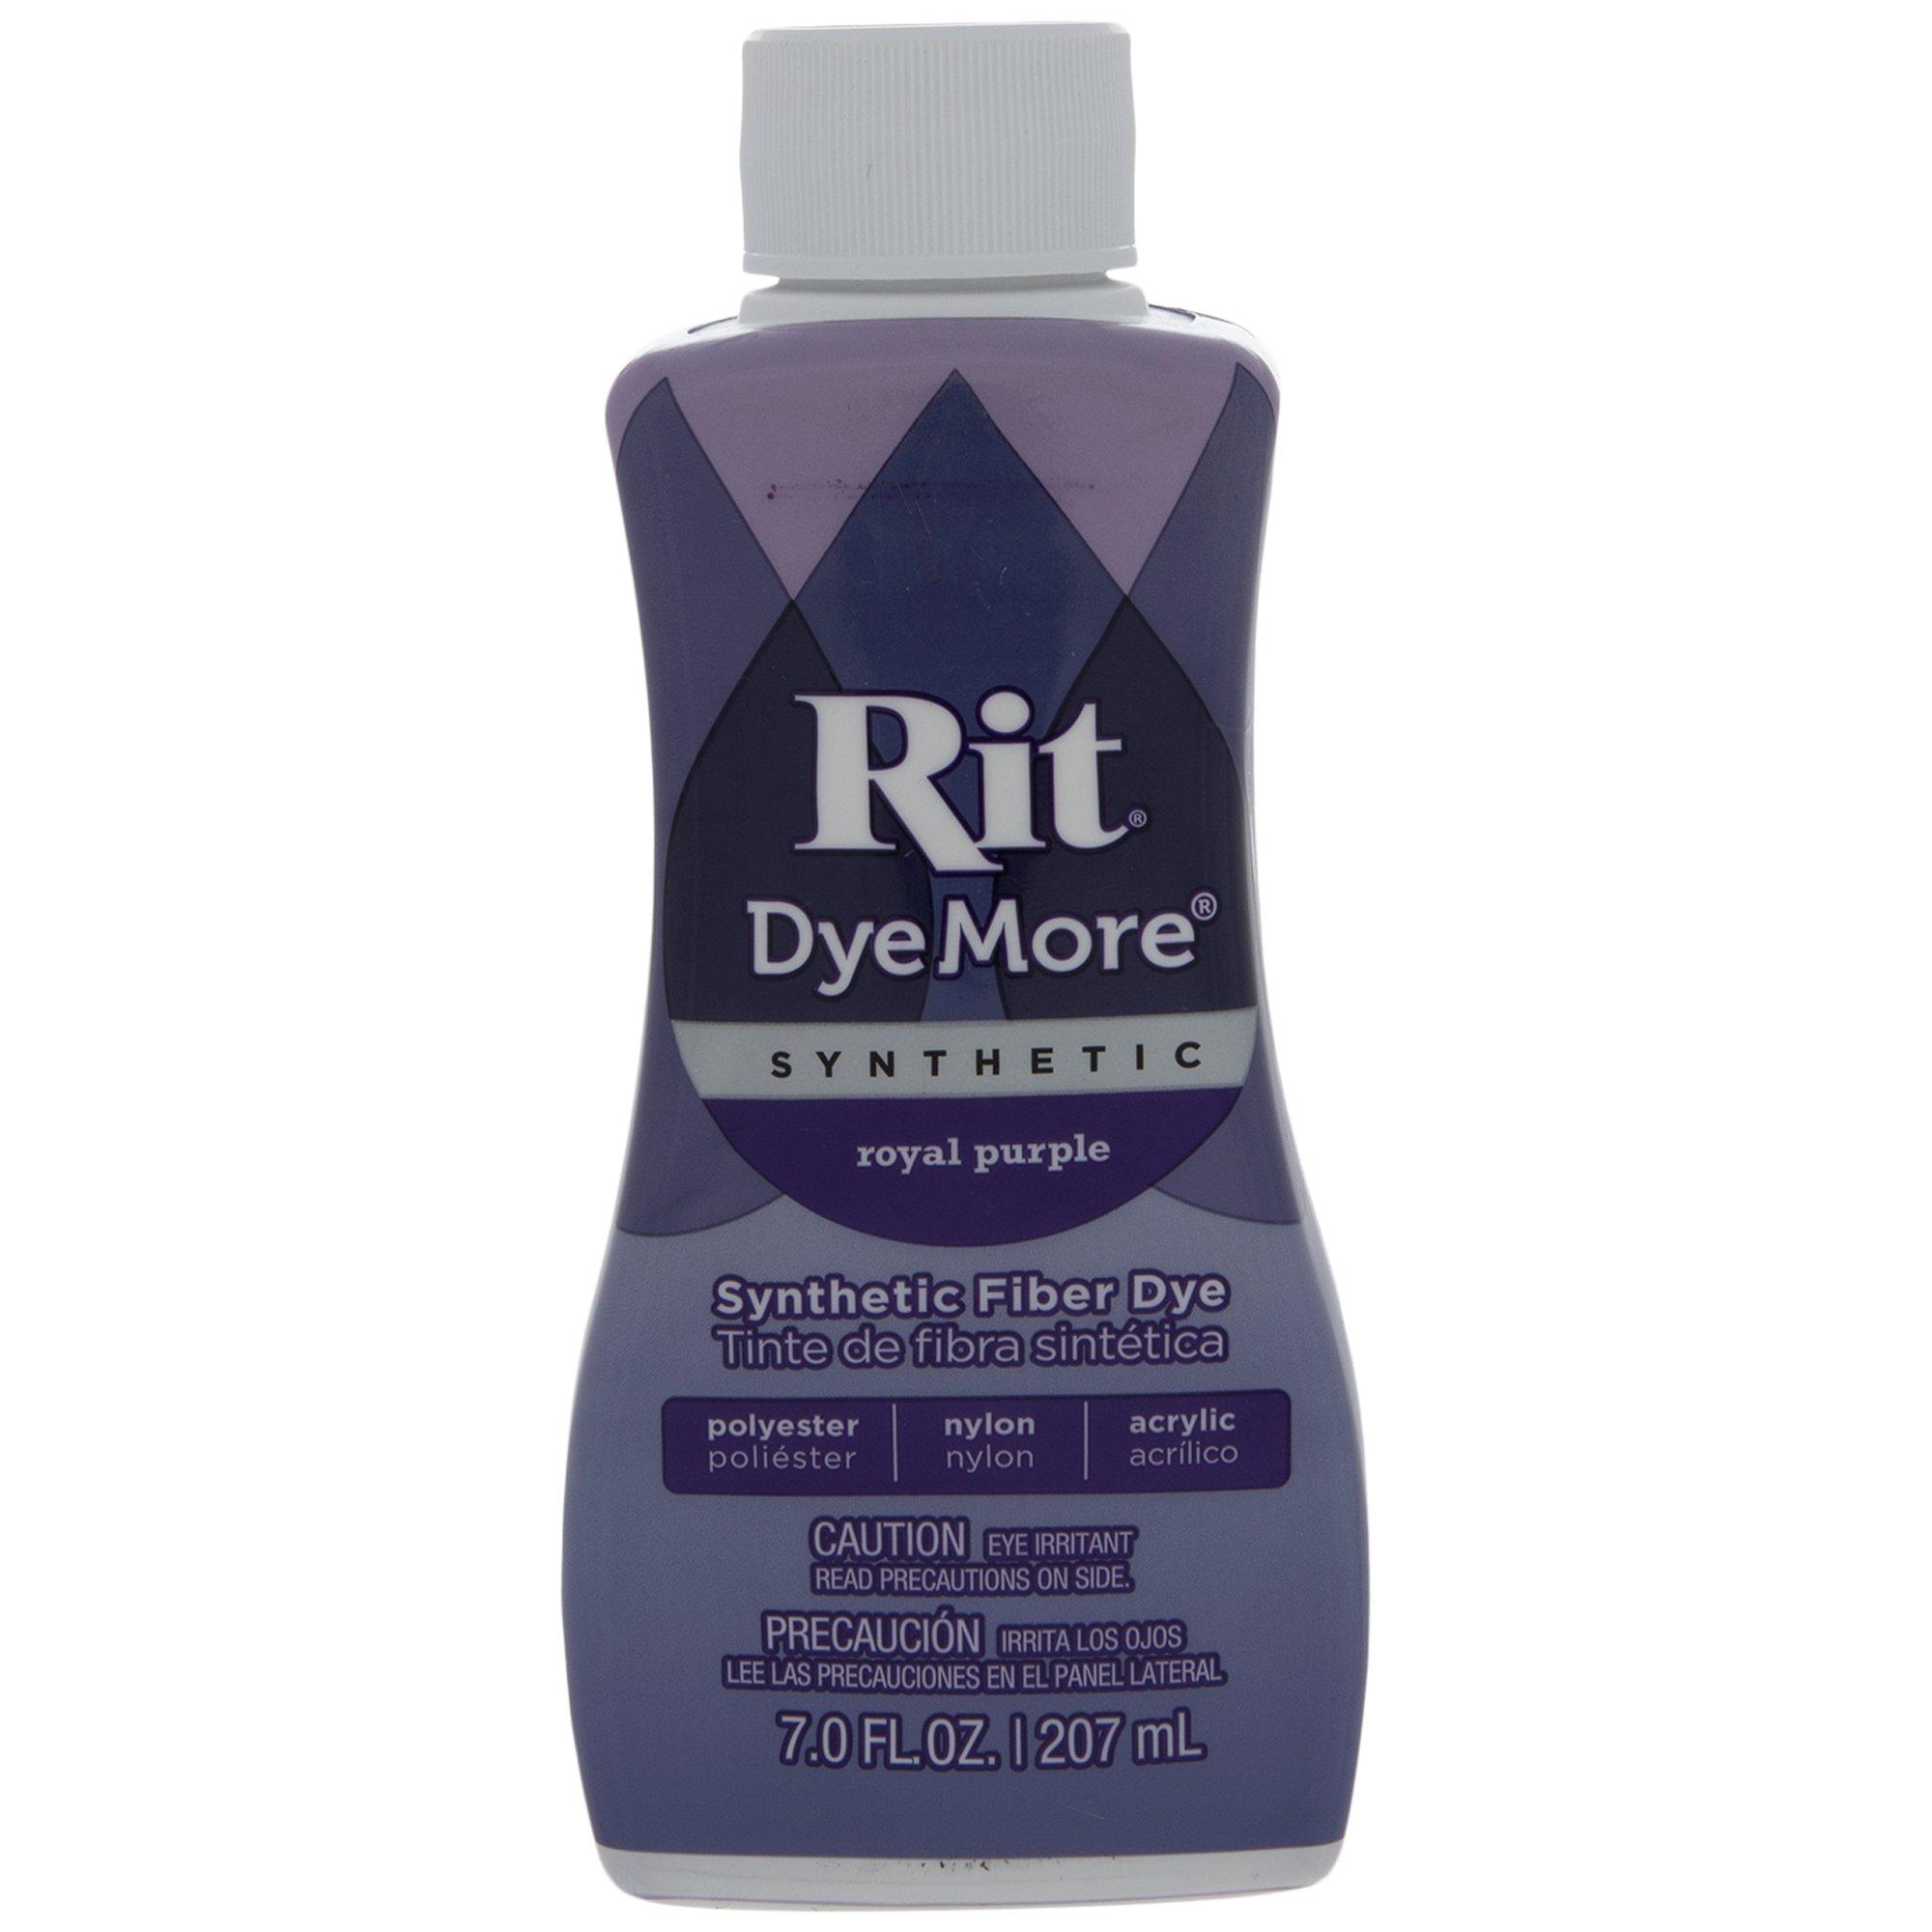 Rit DyeMore Synthetic Liquid Dye | 12 Pack | Works with Polyester, Acrylic,  Plastics, Nylon, and Other Fabrics| Create Custom Colors and Designs